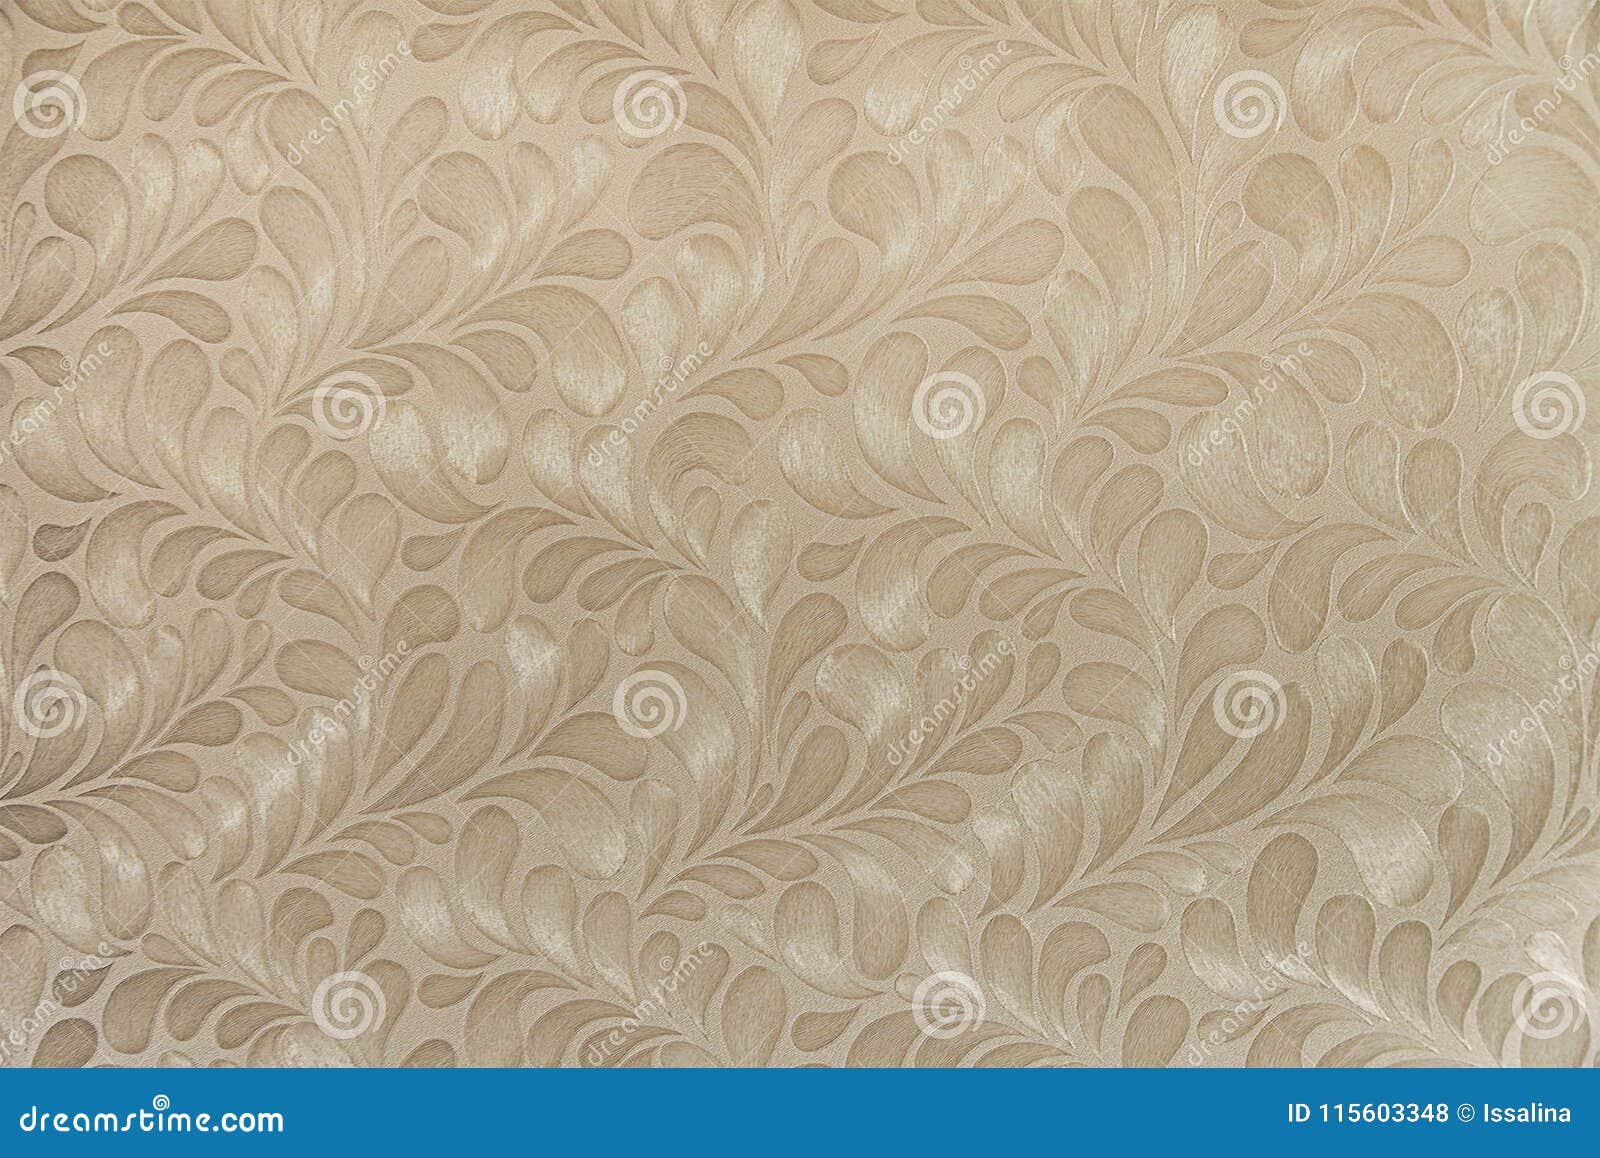 237200 Flower Wall Paper Stock Photos Pictures  RoyaltyFree Images   iStock  Flower wallpaper Flower pattern Wall texture